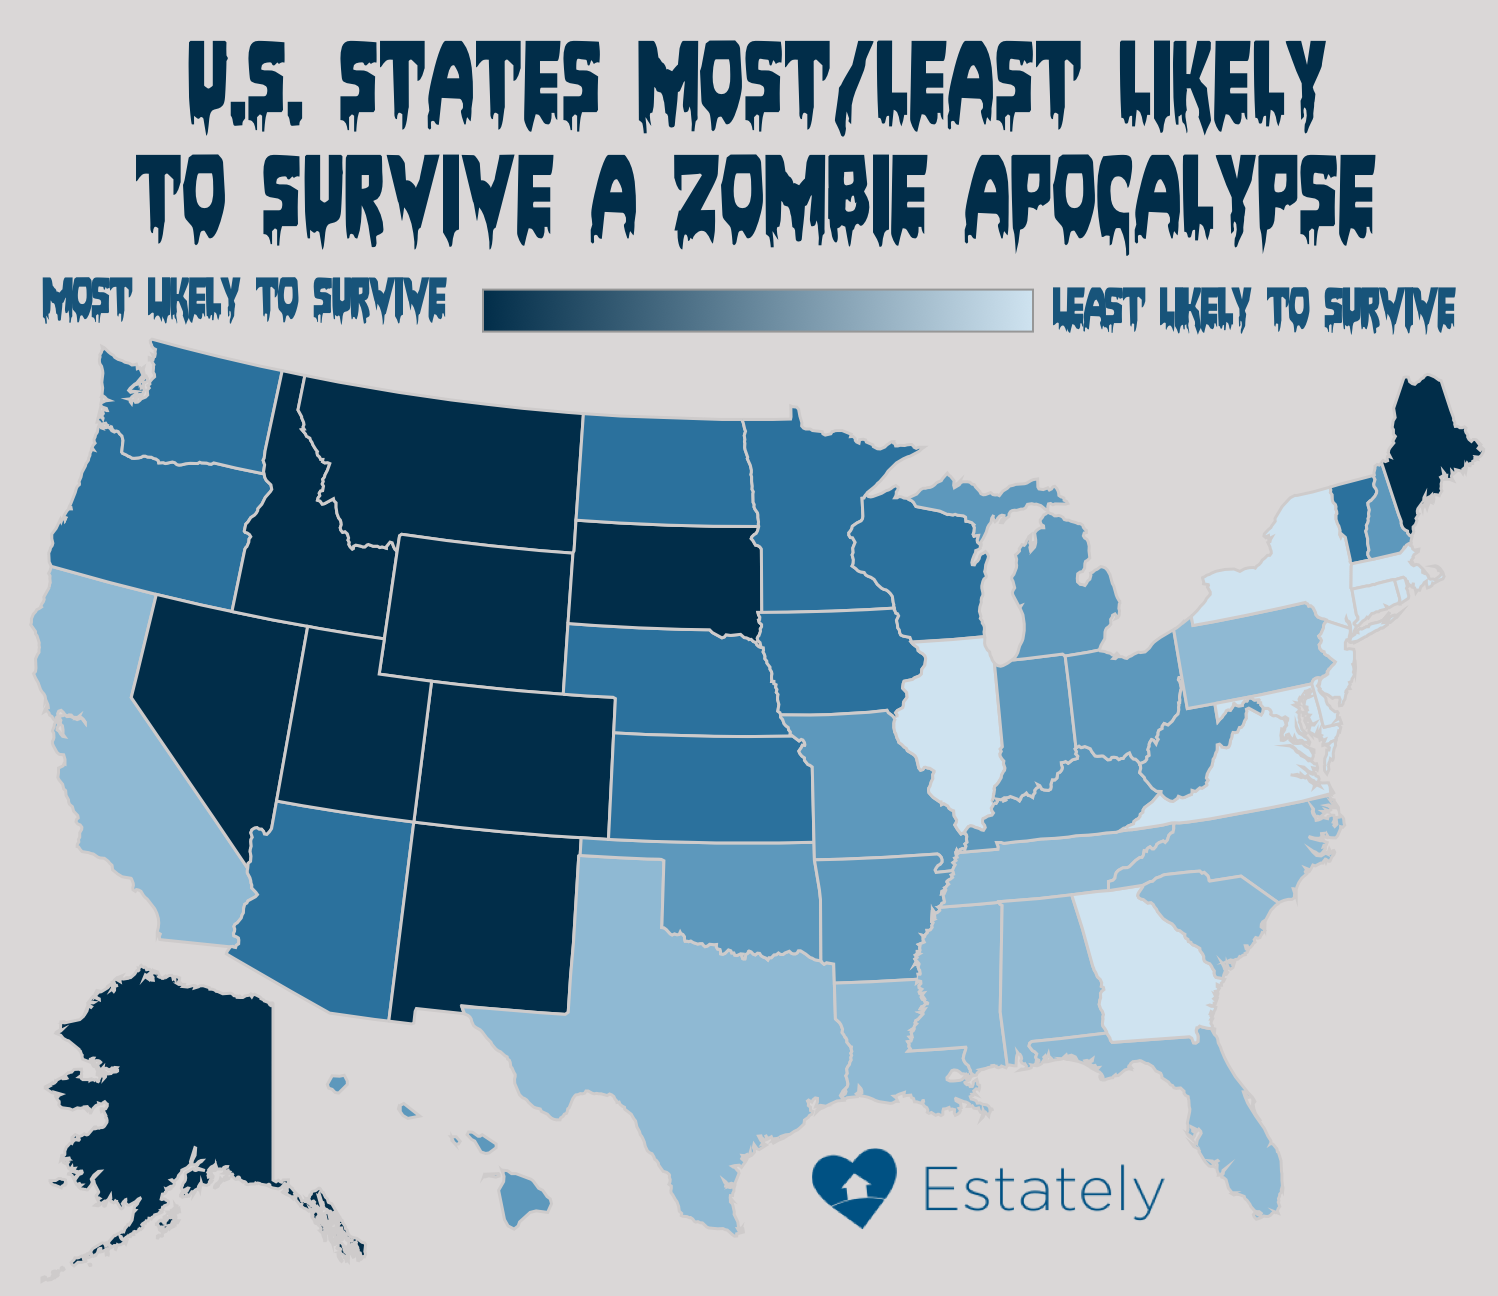 Does your state have what it takes to survive a zombie apocalypse